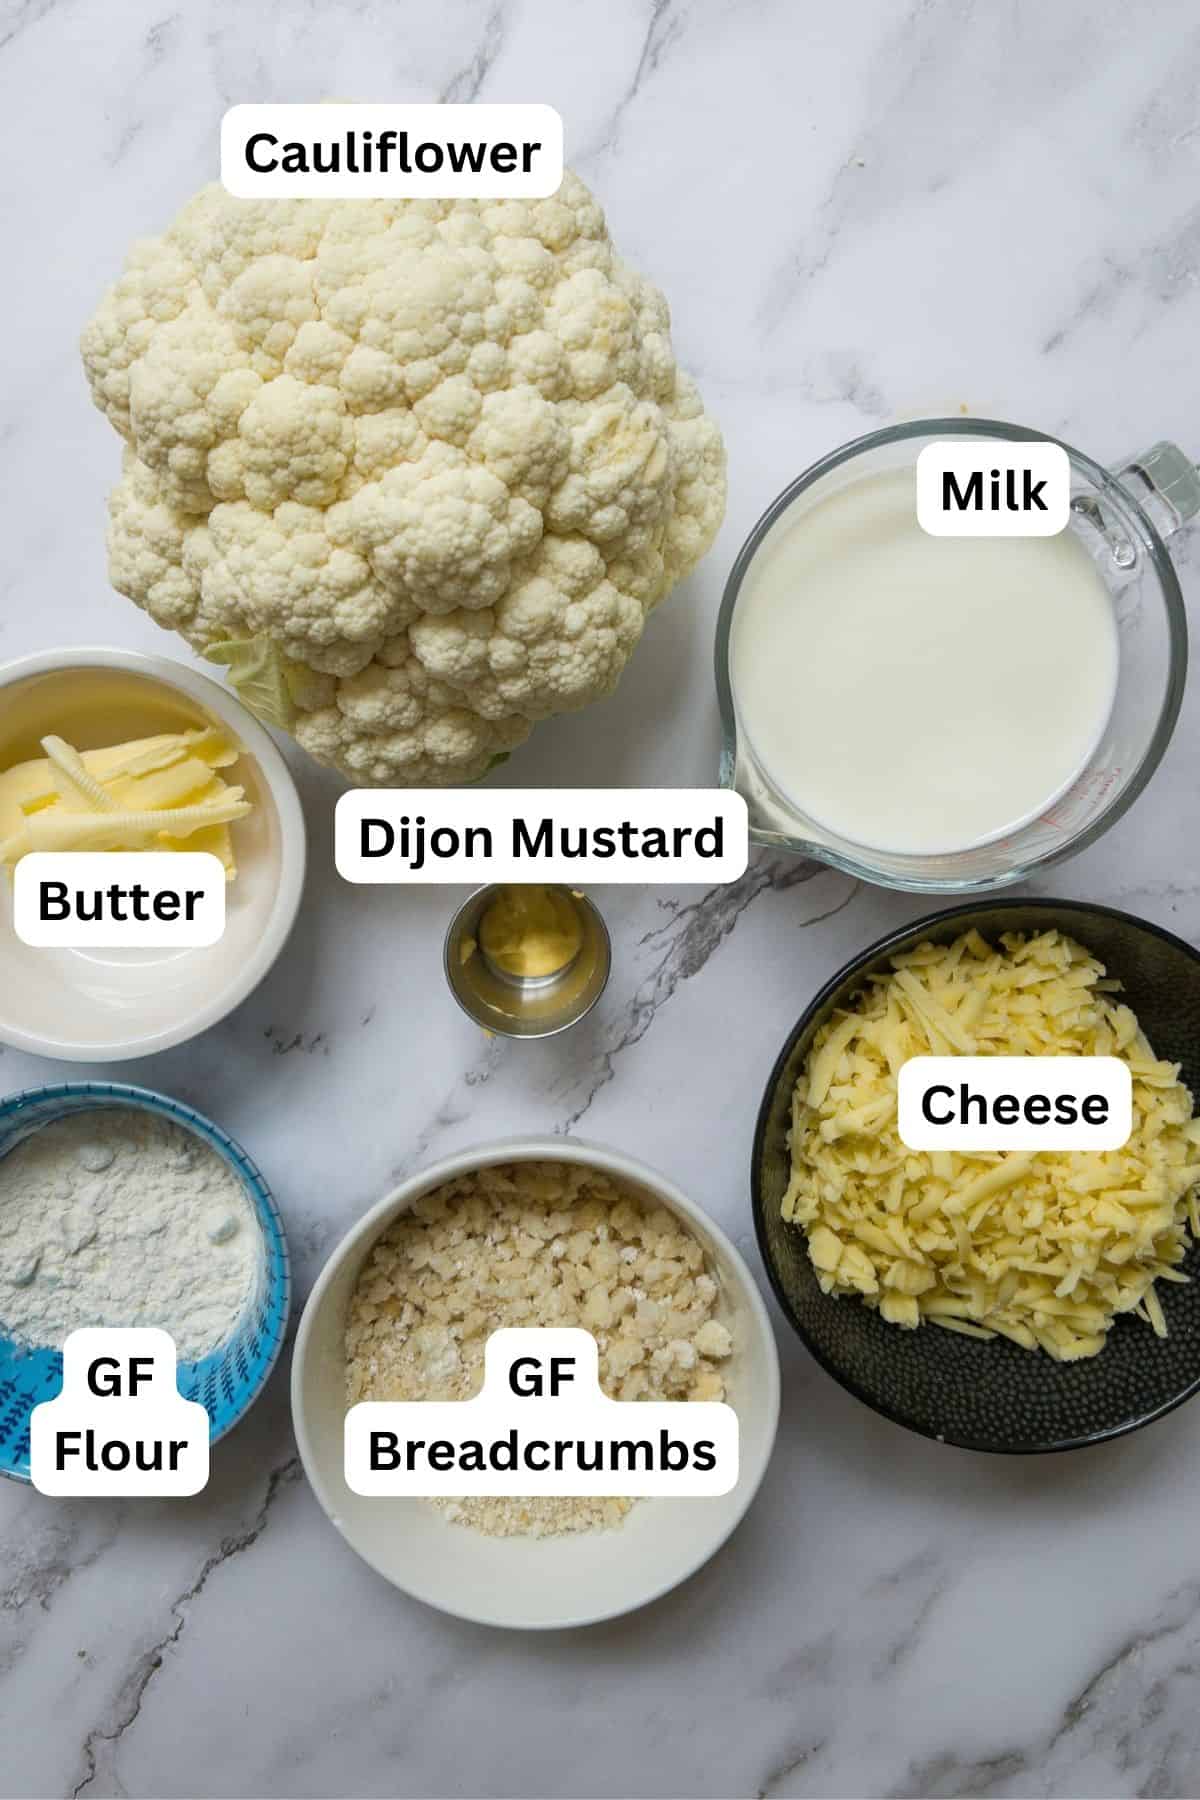 Ingredients laid out for a gluten free cauliflower cheese.